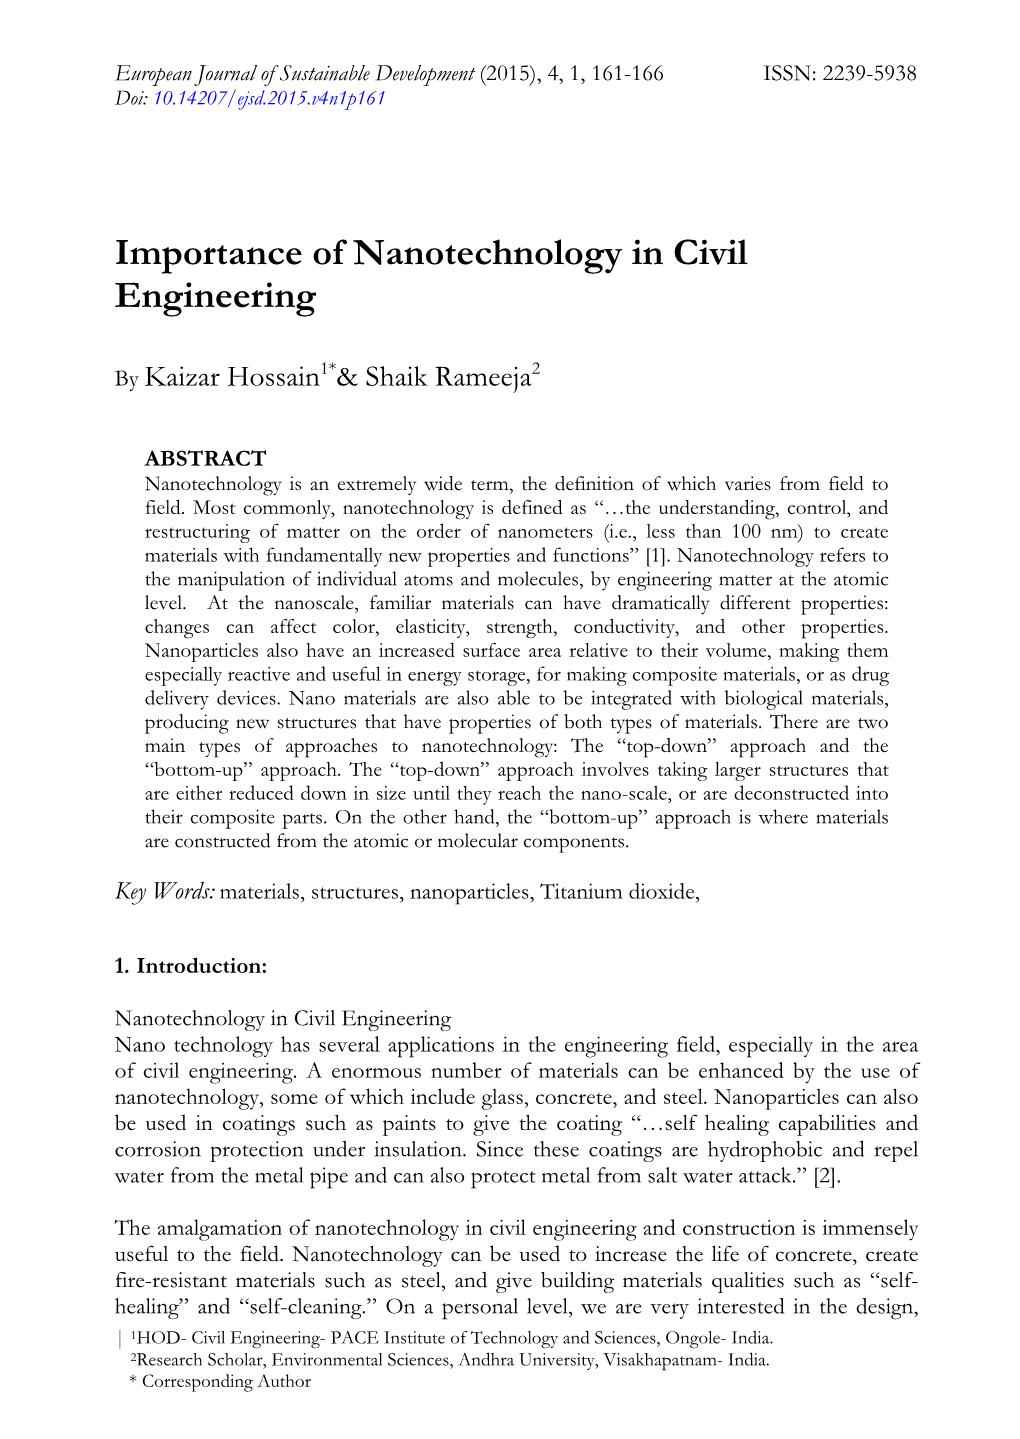 Importance of Nanotechnology in Civil Engineering